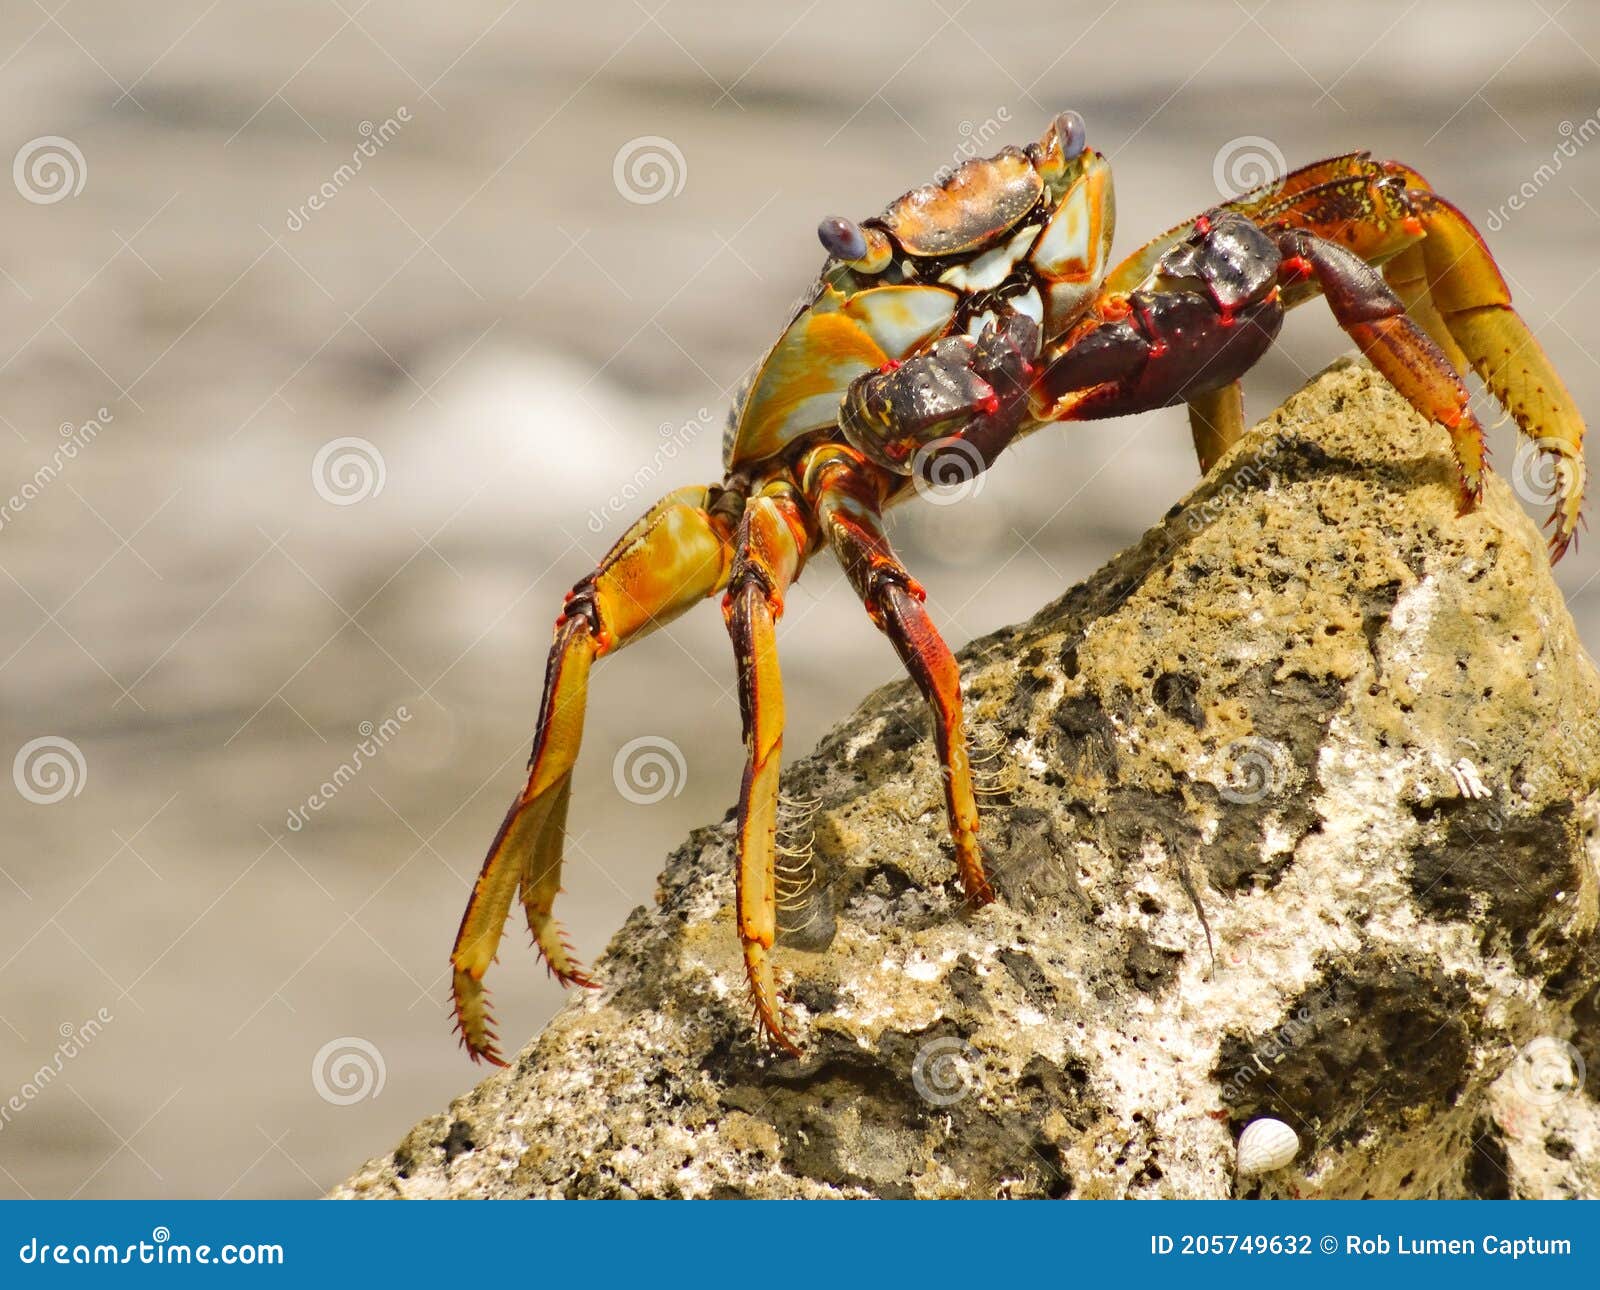 sally lightfoot crab grapsus grapsus, on a rock in bonaire